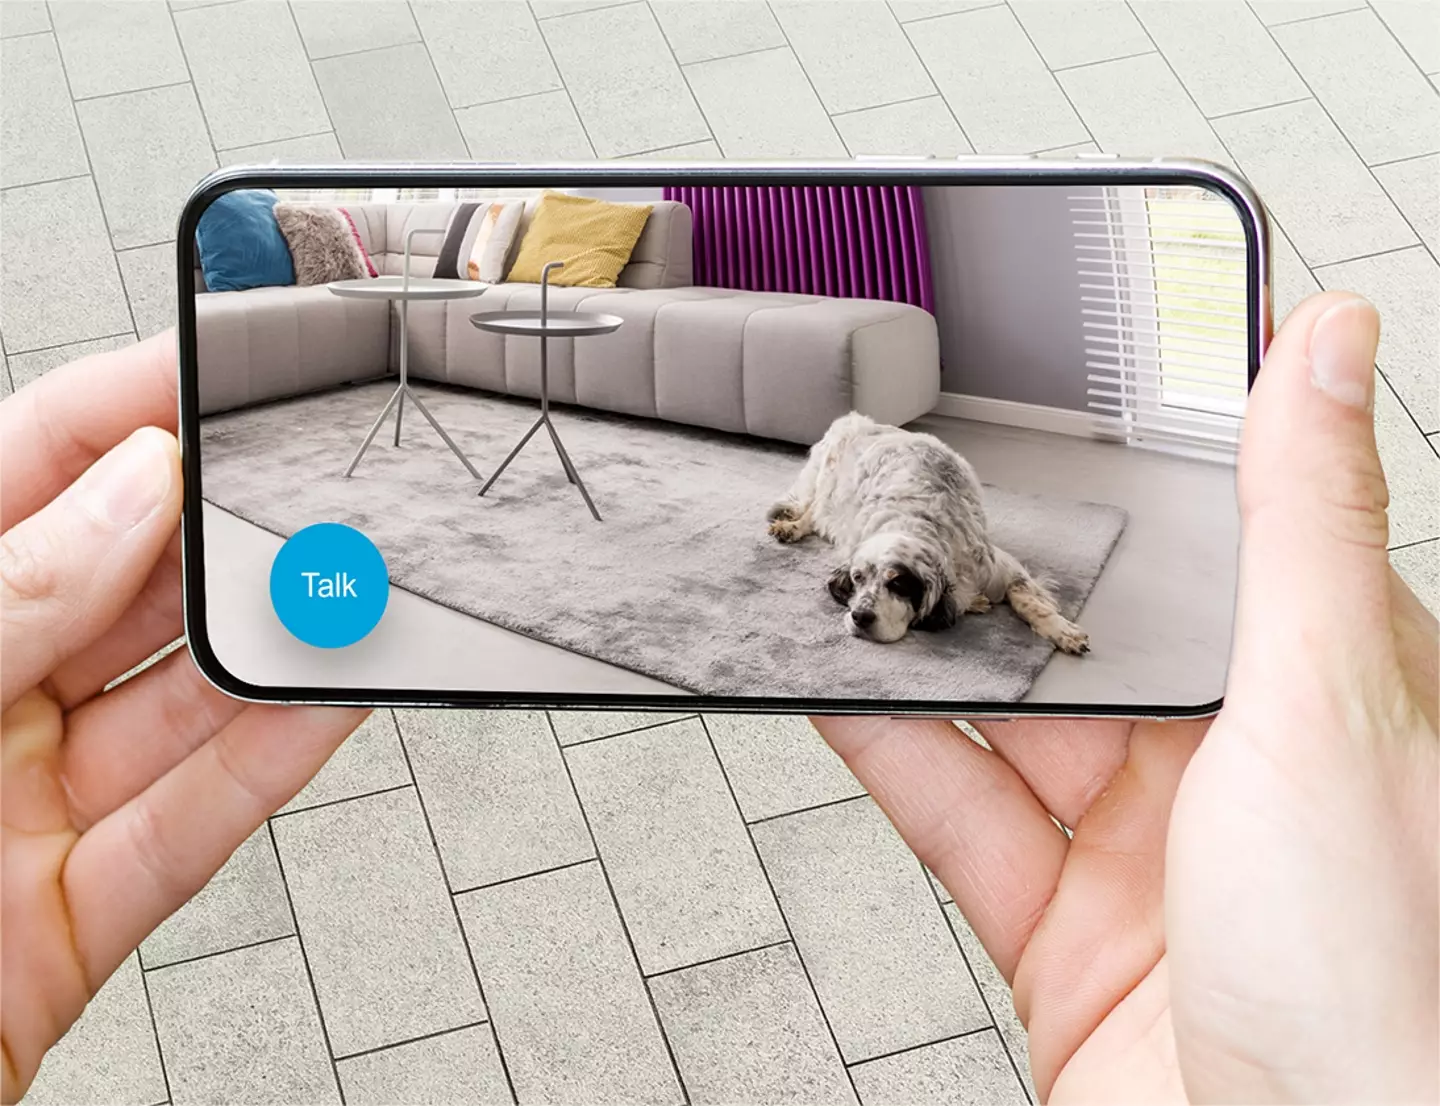 Watch your pets in the Blink Home app.